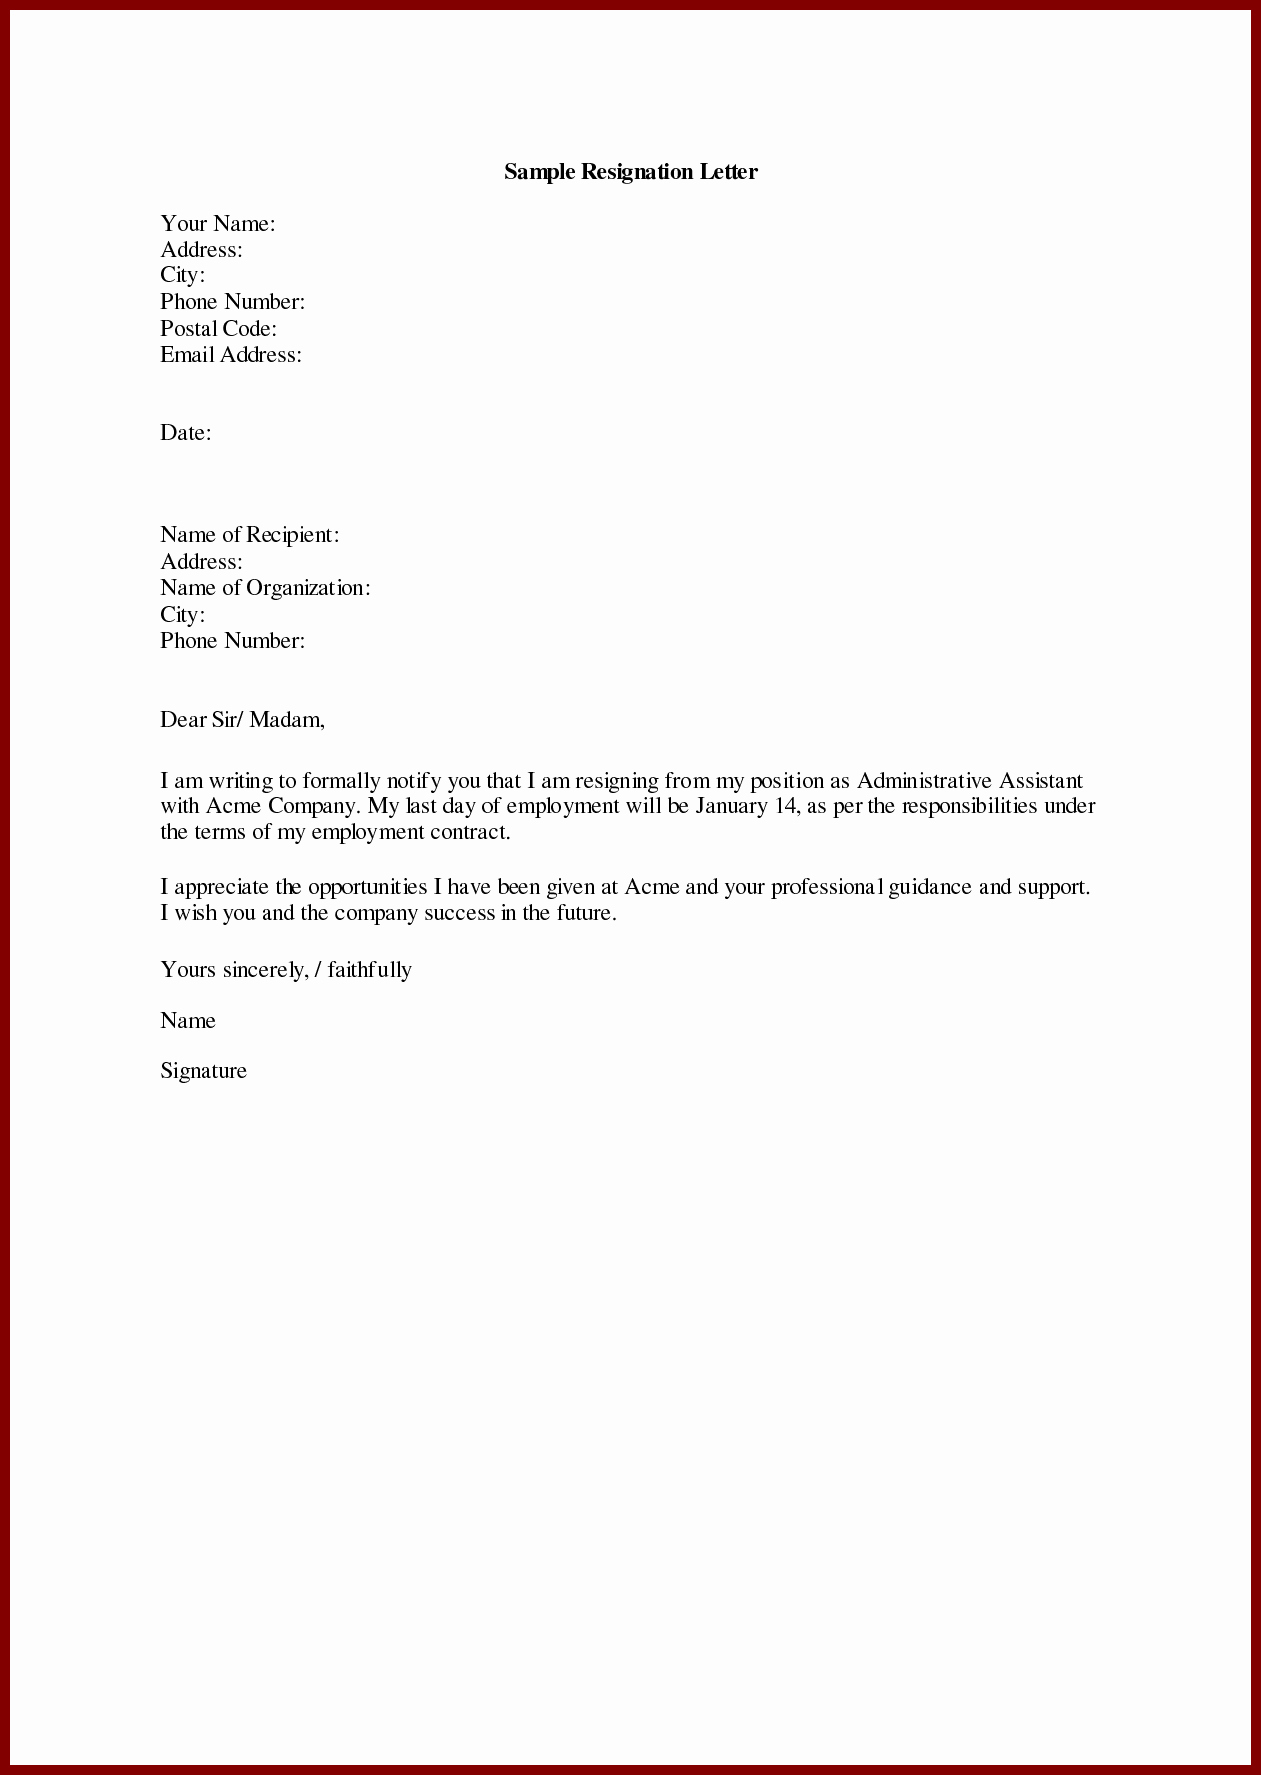 Free Resignation Letter Template Microsoft Word Download - Free Resignation Letter Template Word Microsoft Download Due to